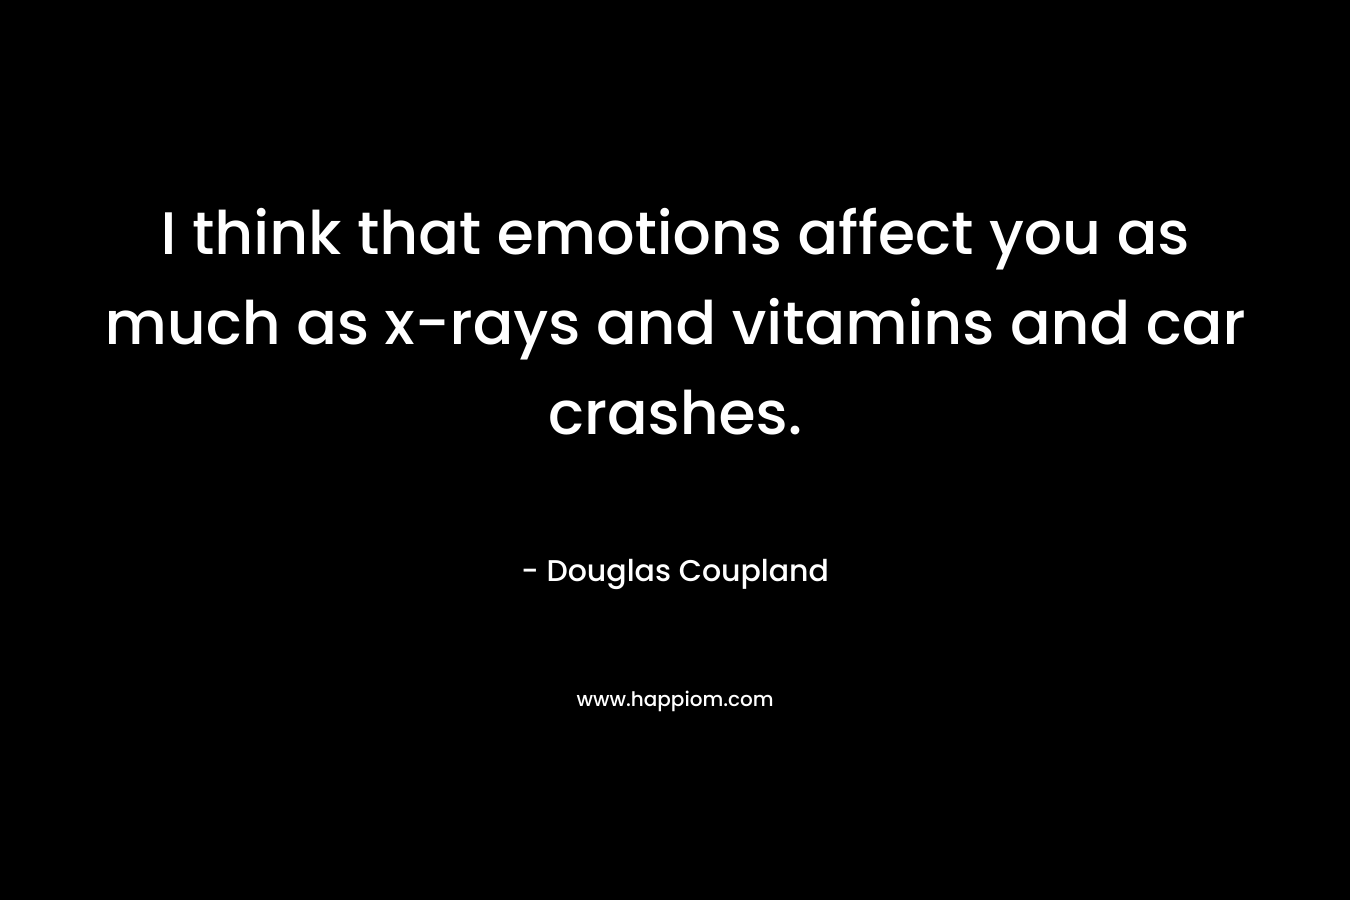 I think that emotions affect you as much as x-rays and vitamins and car crashes.